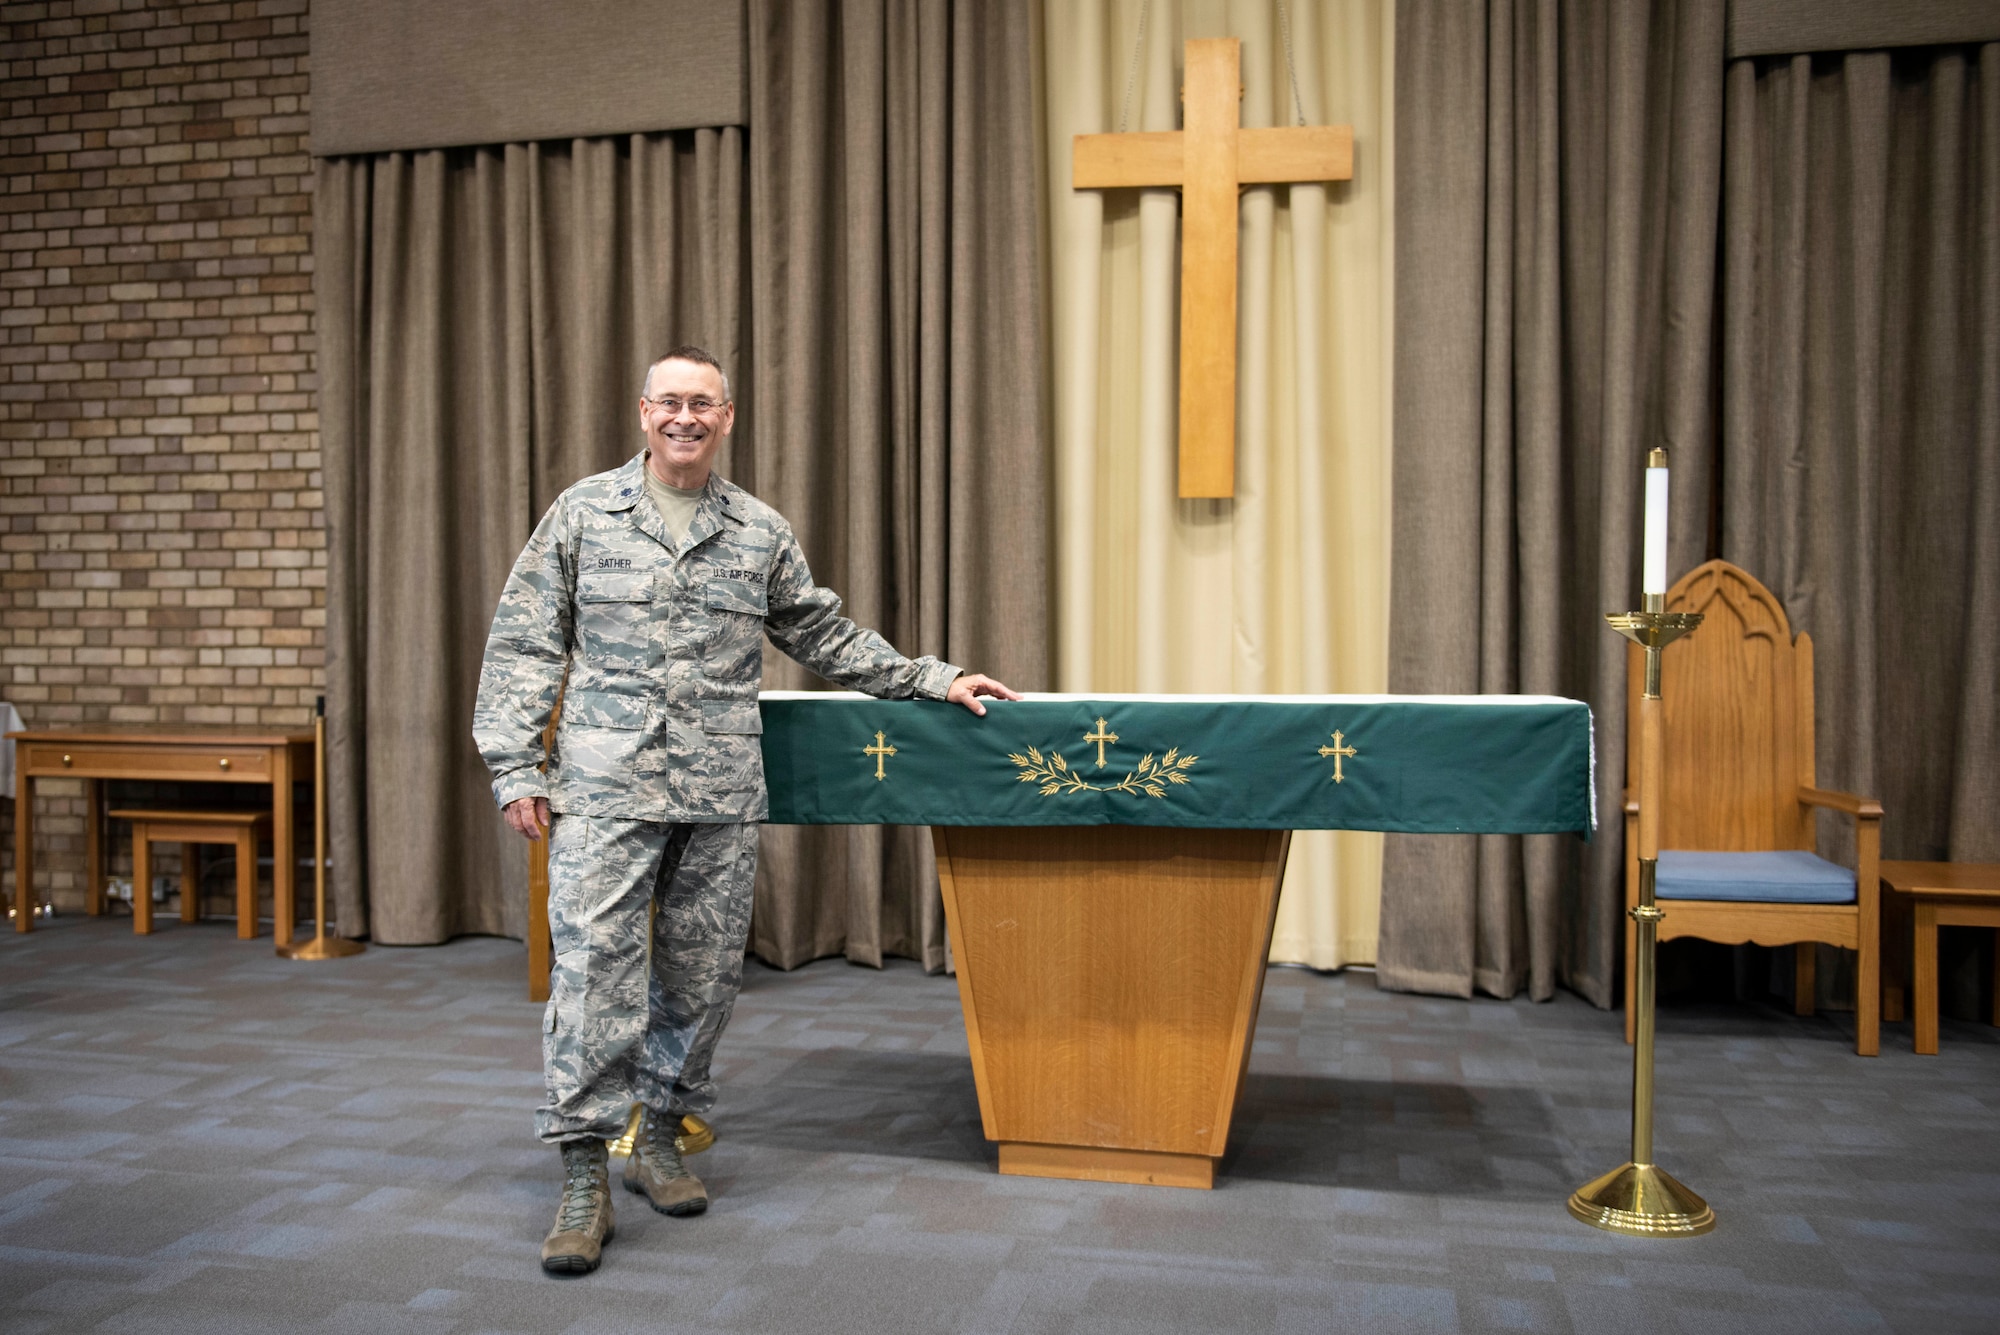 U.S. Air Force Lt. Col. Jerry Sather, 501st Combat Support Wing chaplain, poses for a photo at the base chapel at RAF Alconbury, England, July 15, 2020. After 41 years of military service, Sather shared his experiences and his reflection on diversity in the military. (U.S. Air Force photo by Airman 1st Class Jennifer Zima)